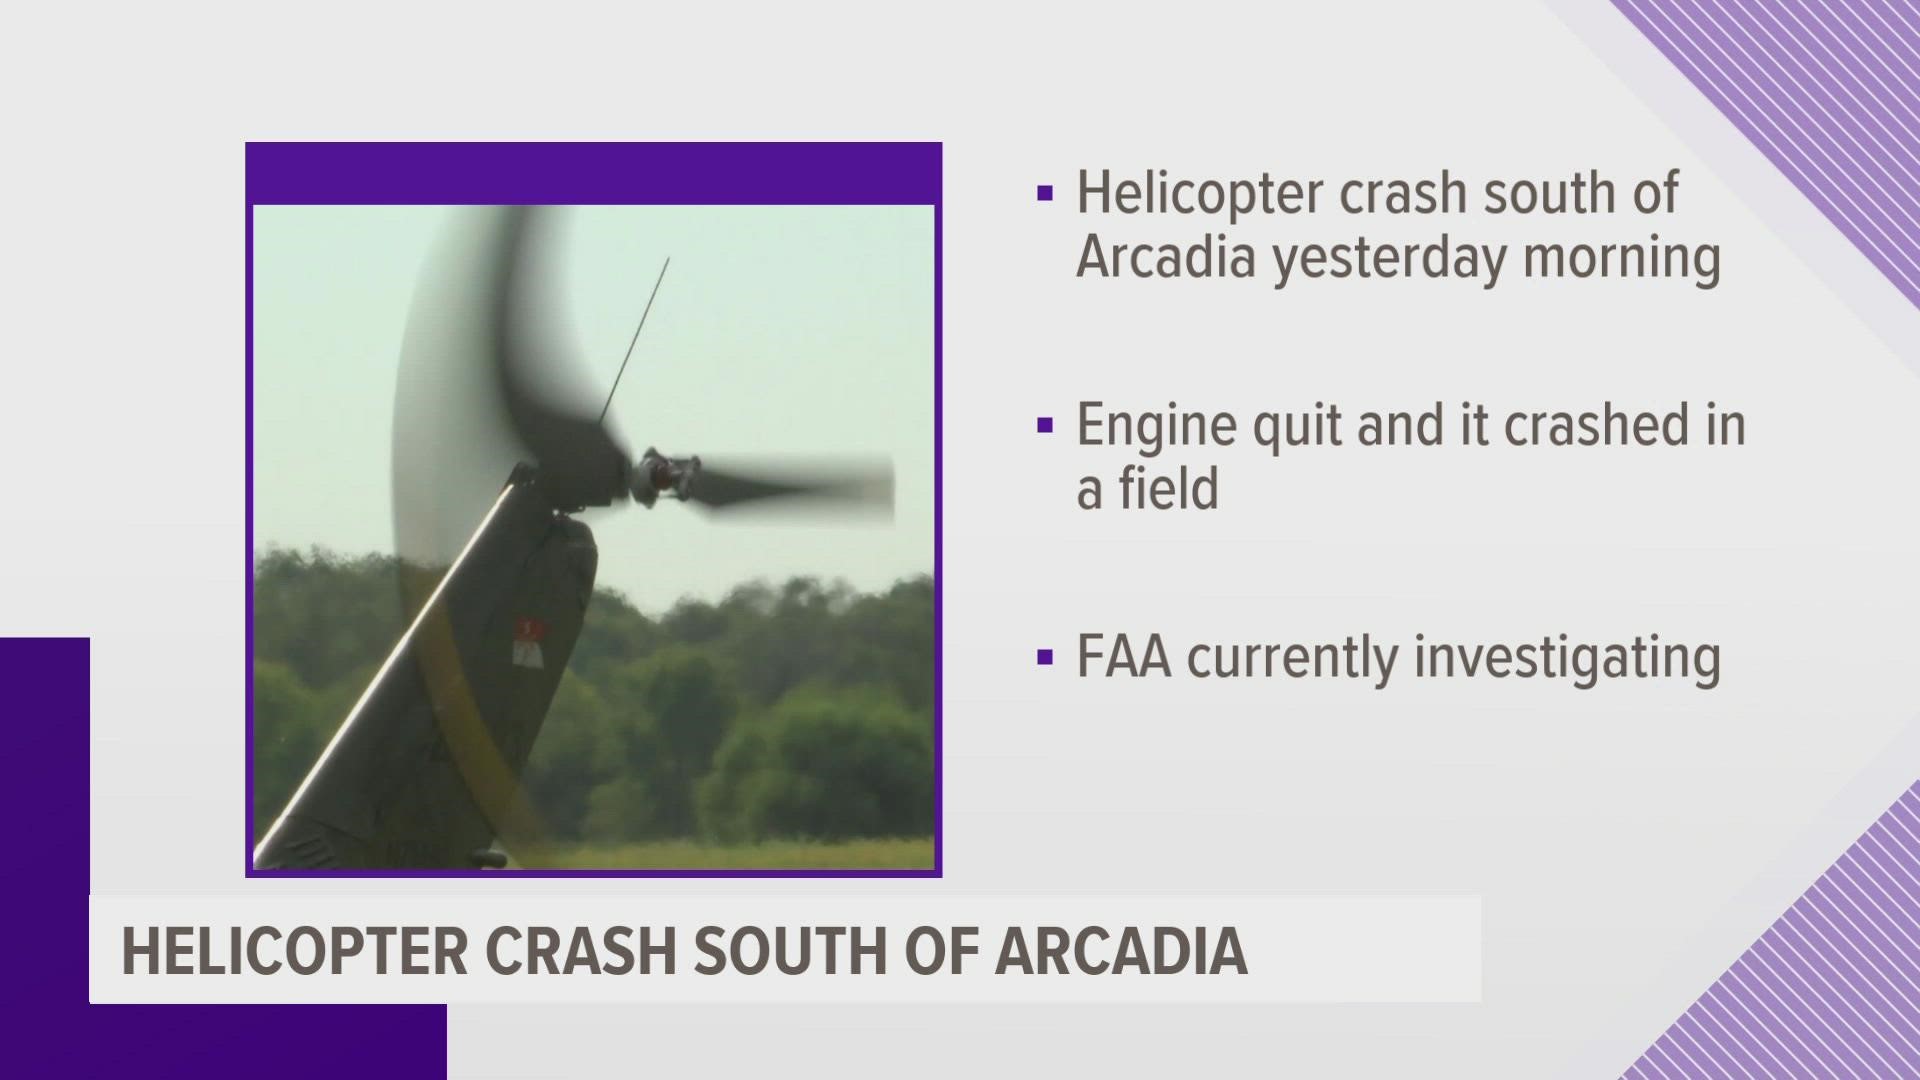 The helicopter was spraying a corn field Monday morning when the engine quit and it crashed. The 78-year-old pilot was able to walk away from the crash to get help.